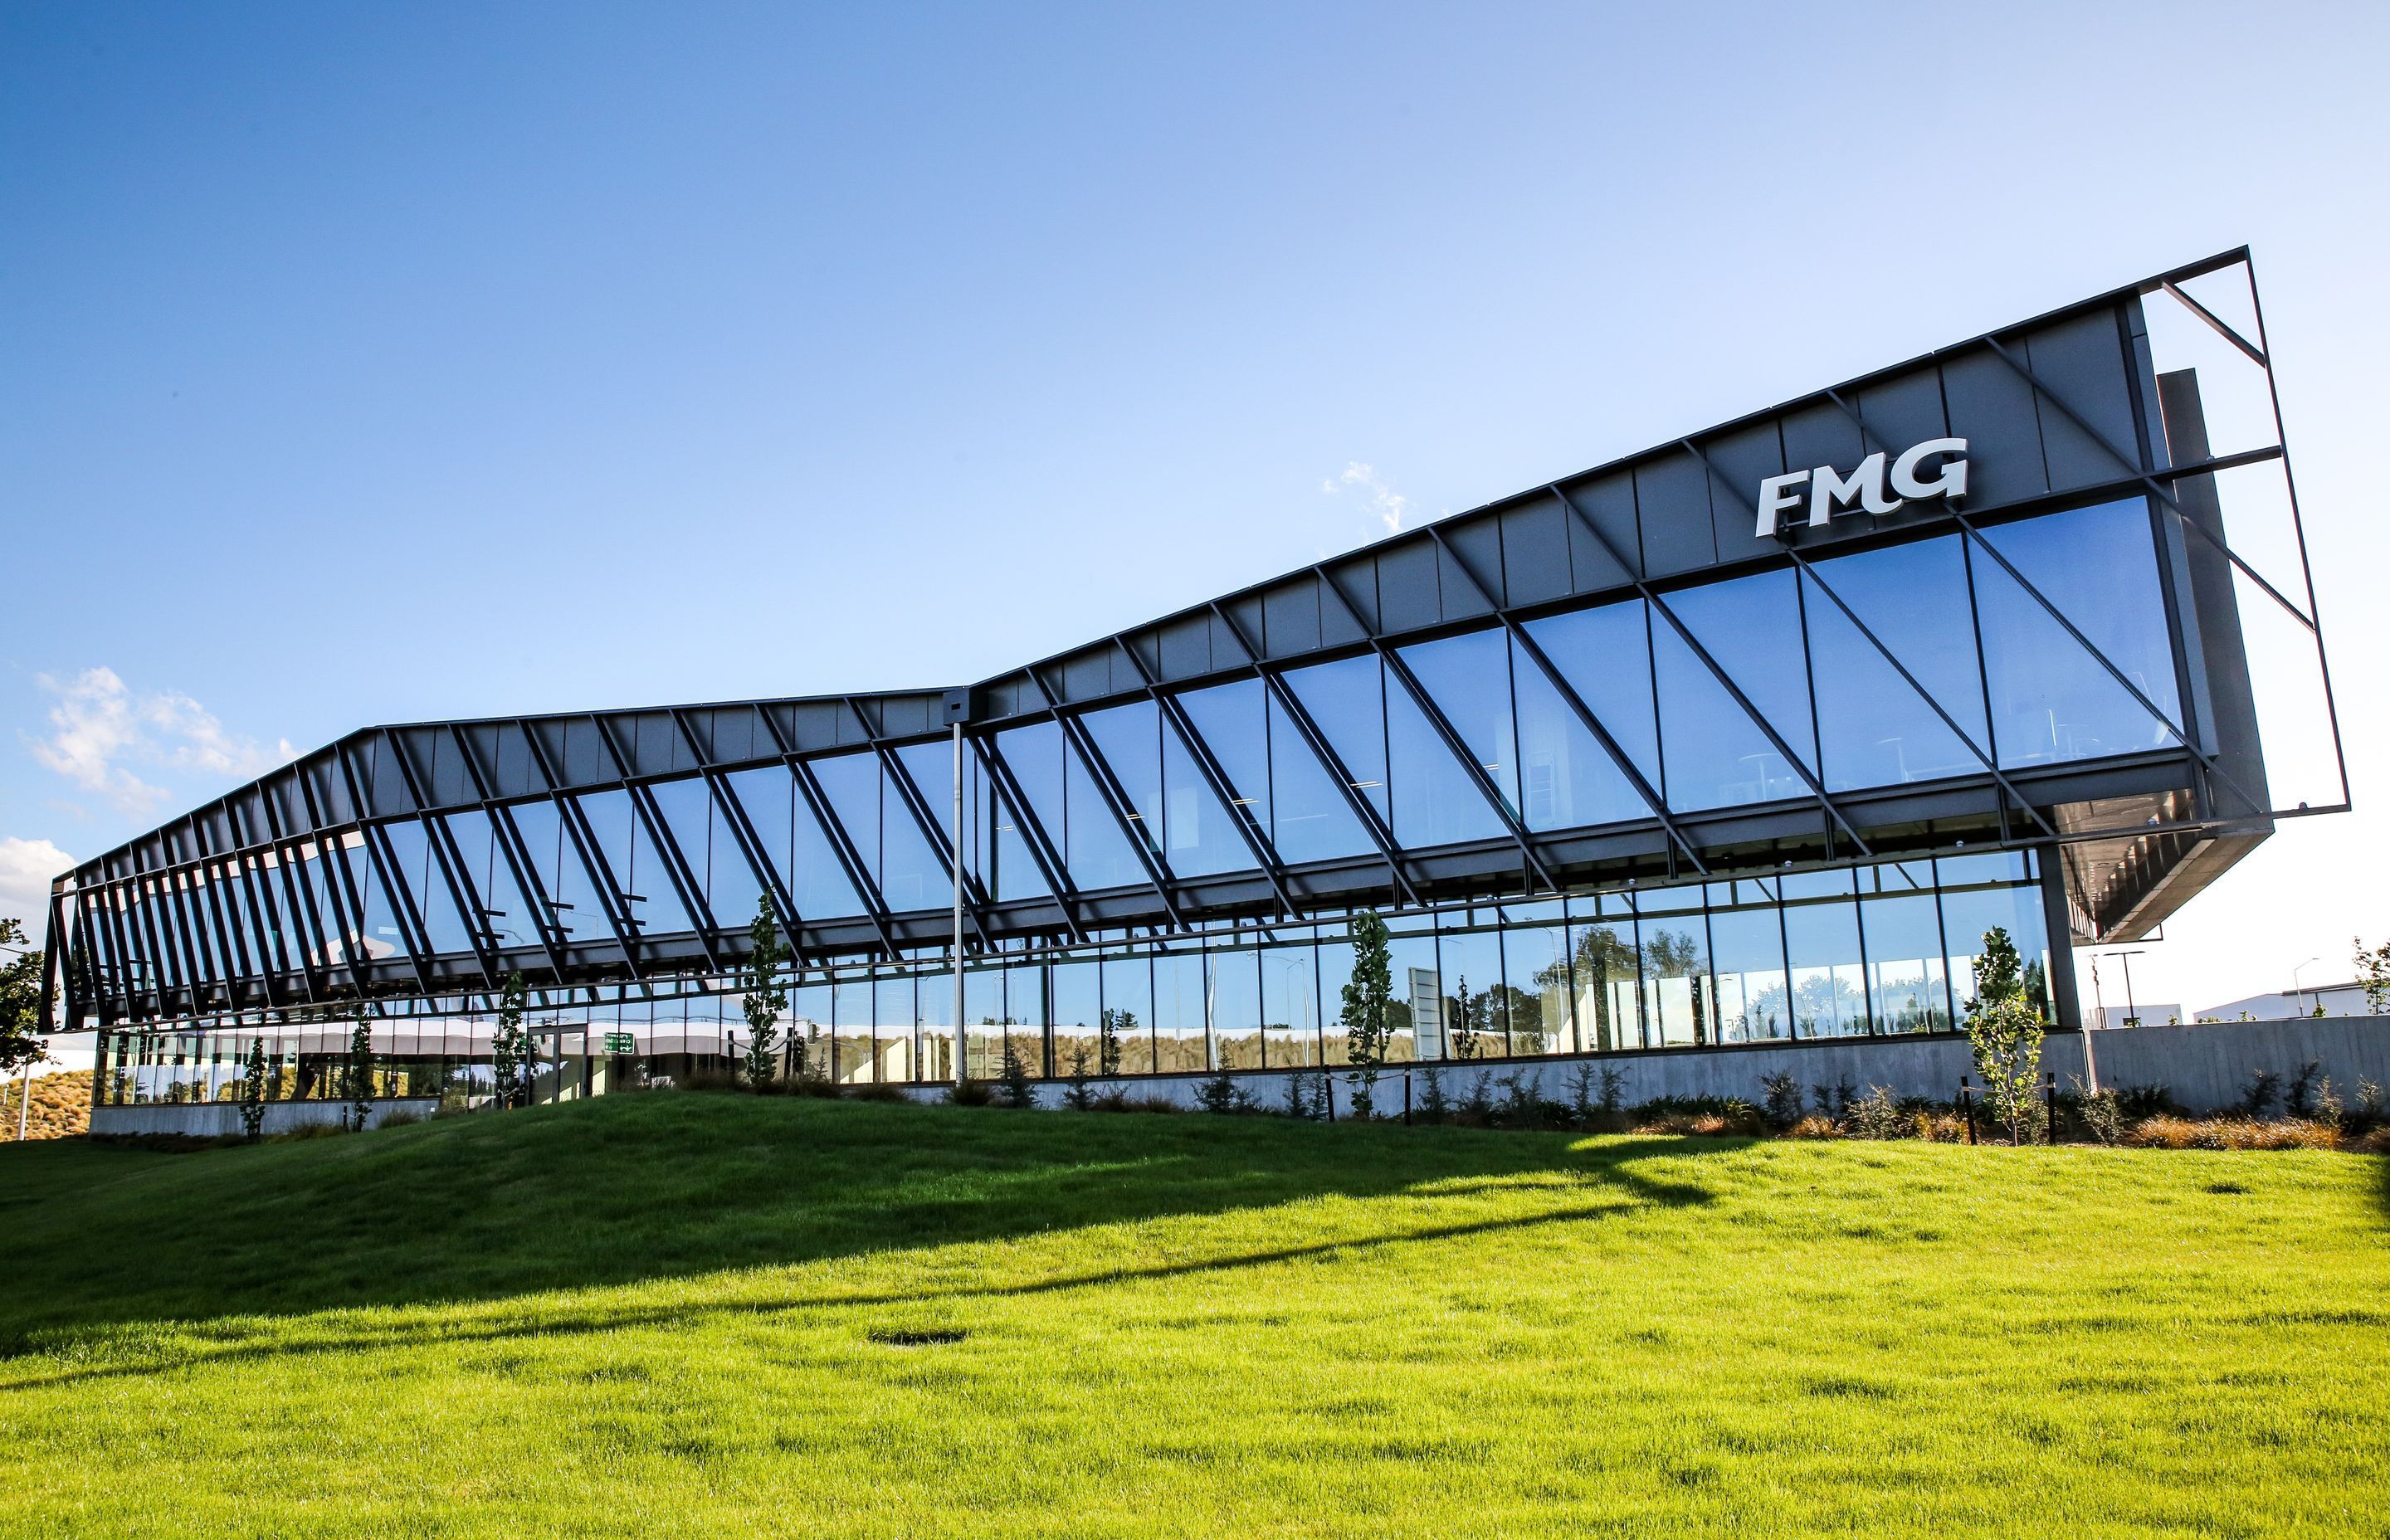 For the FMG office building at Christchurch International Airport, the high-performance PW1000 unitised curtainwall system was installed with integrated solar shading devices on uppler level and integrated doors on the lower level.